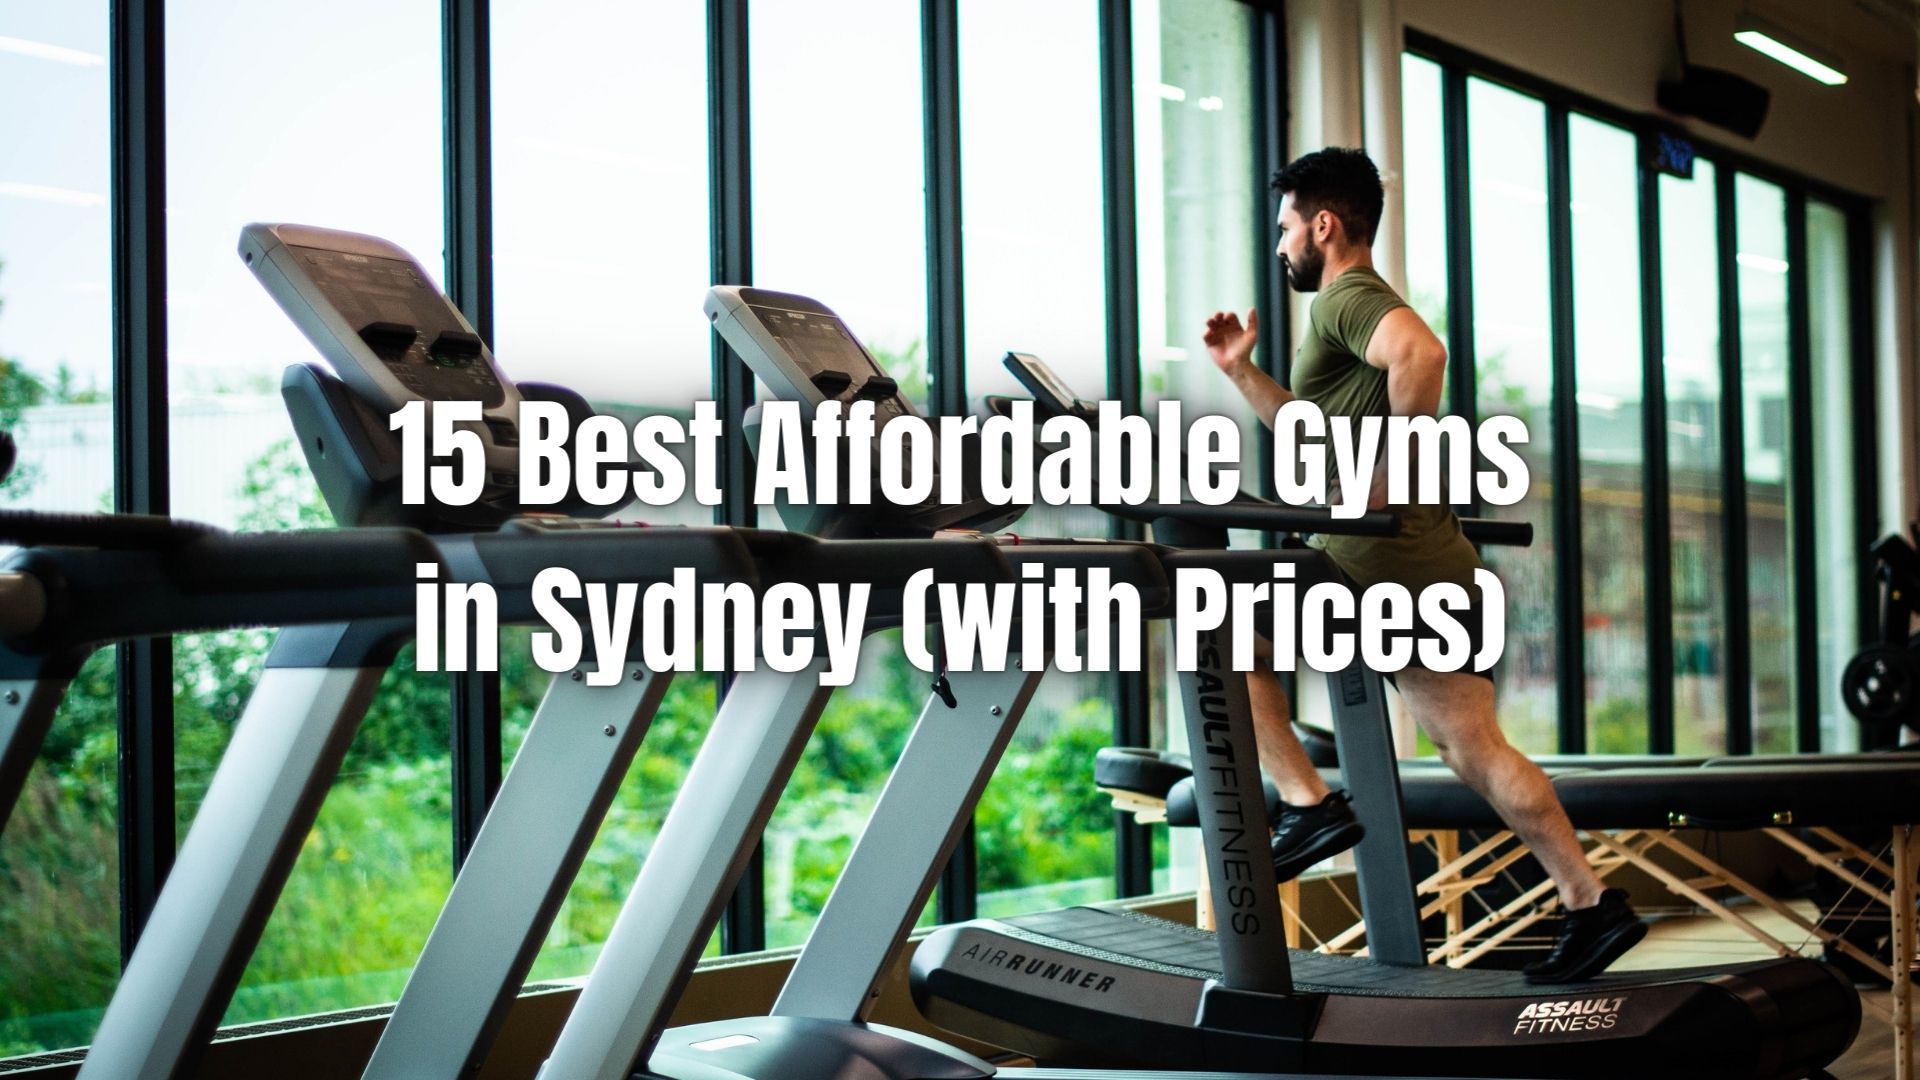 Hit Your Fitness Goals Without Breaking the Bank! Find the cheapest gyms in Sydney & achieve your fitness dreams. Save big & get in shape!